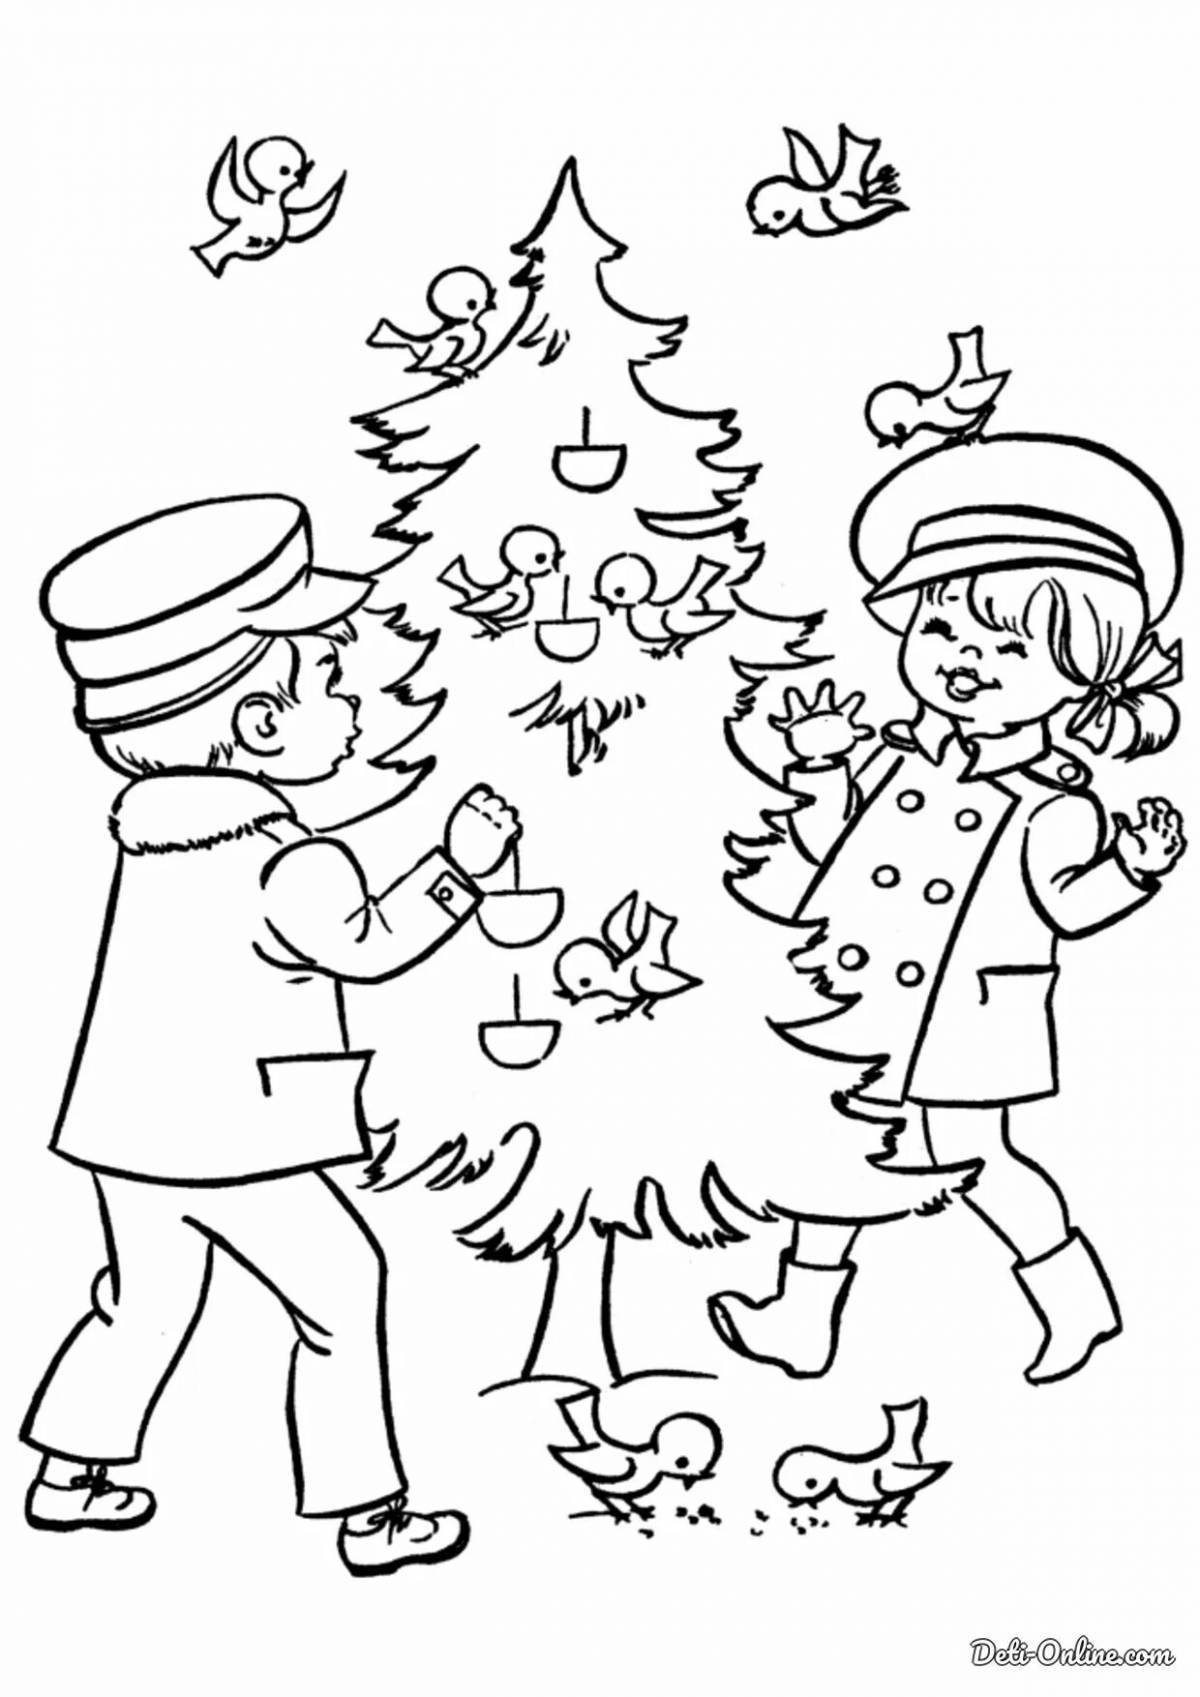 Gorgeous Christmas story coloring book